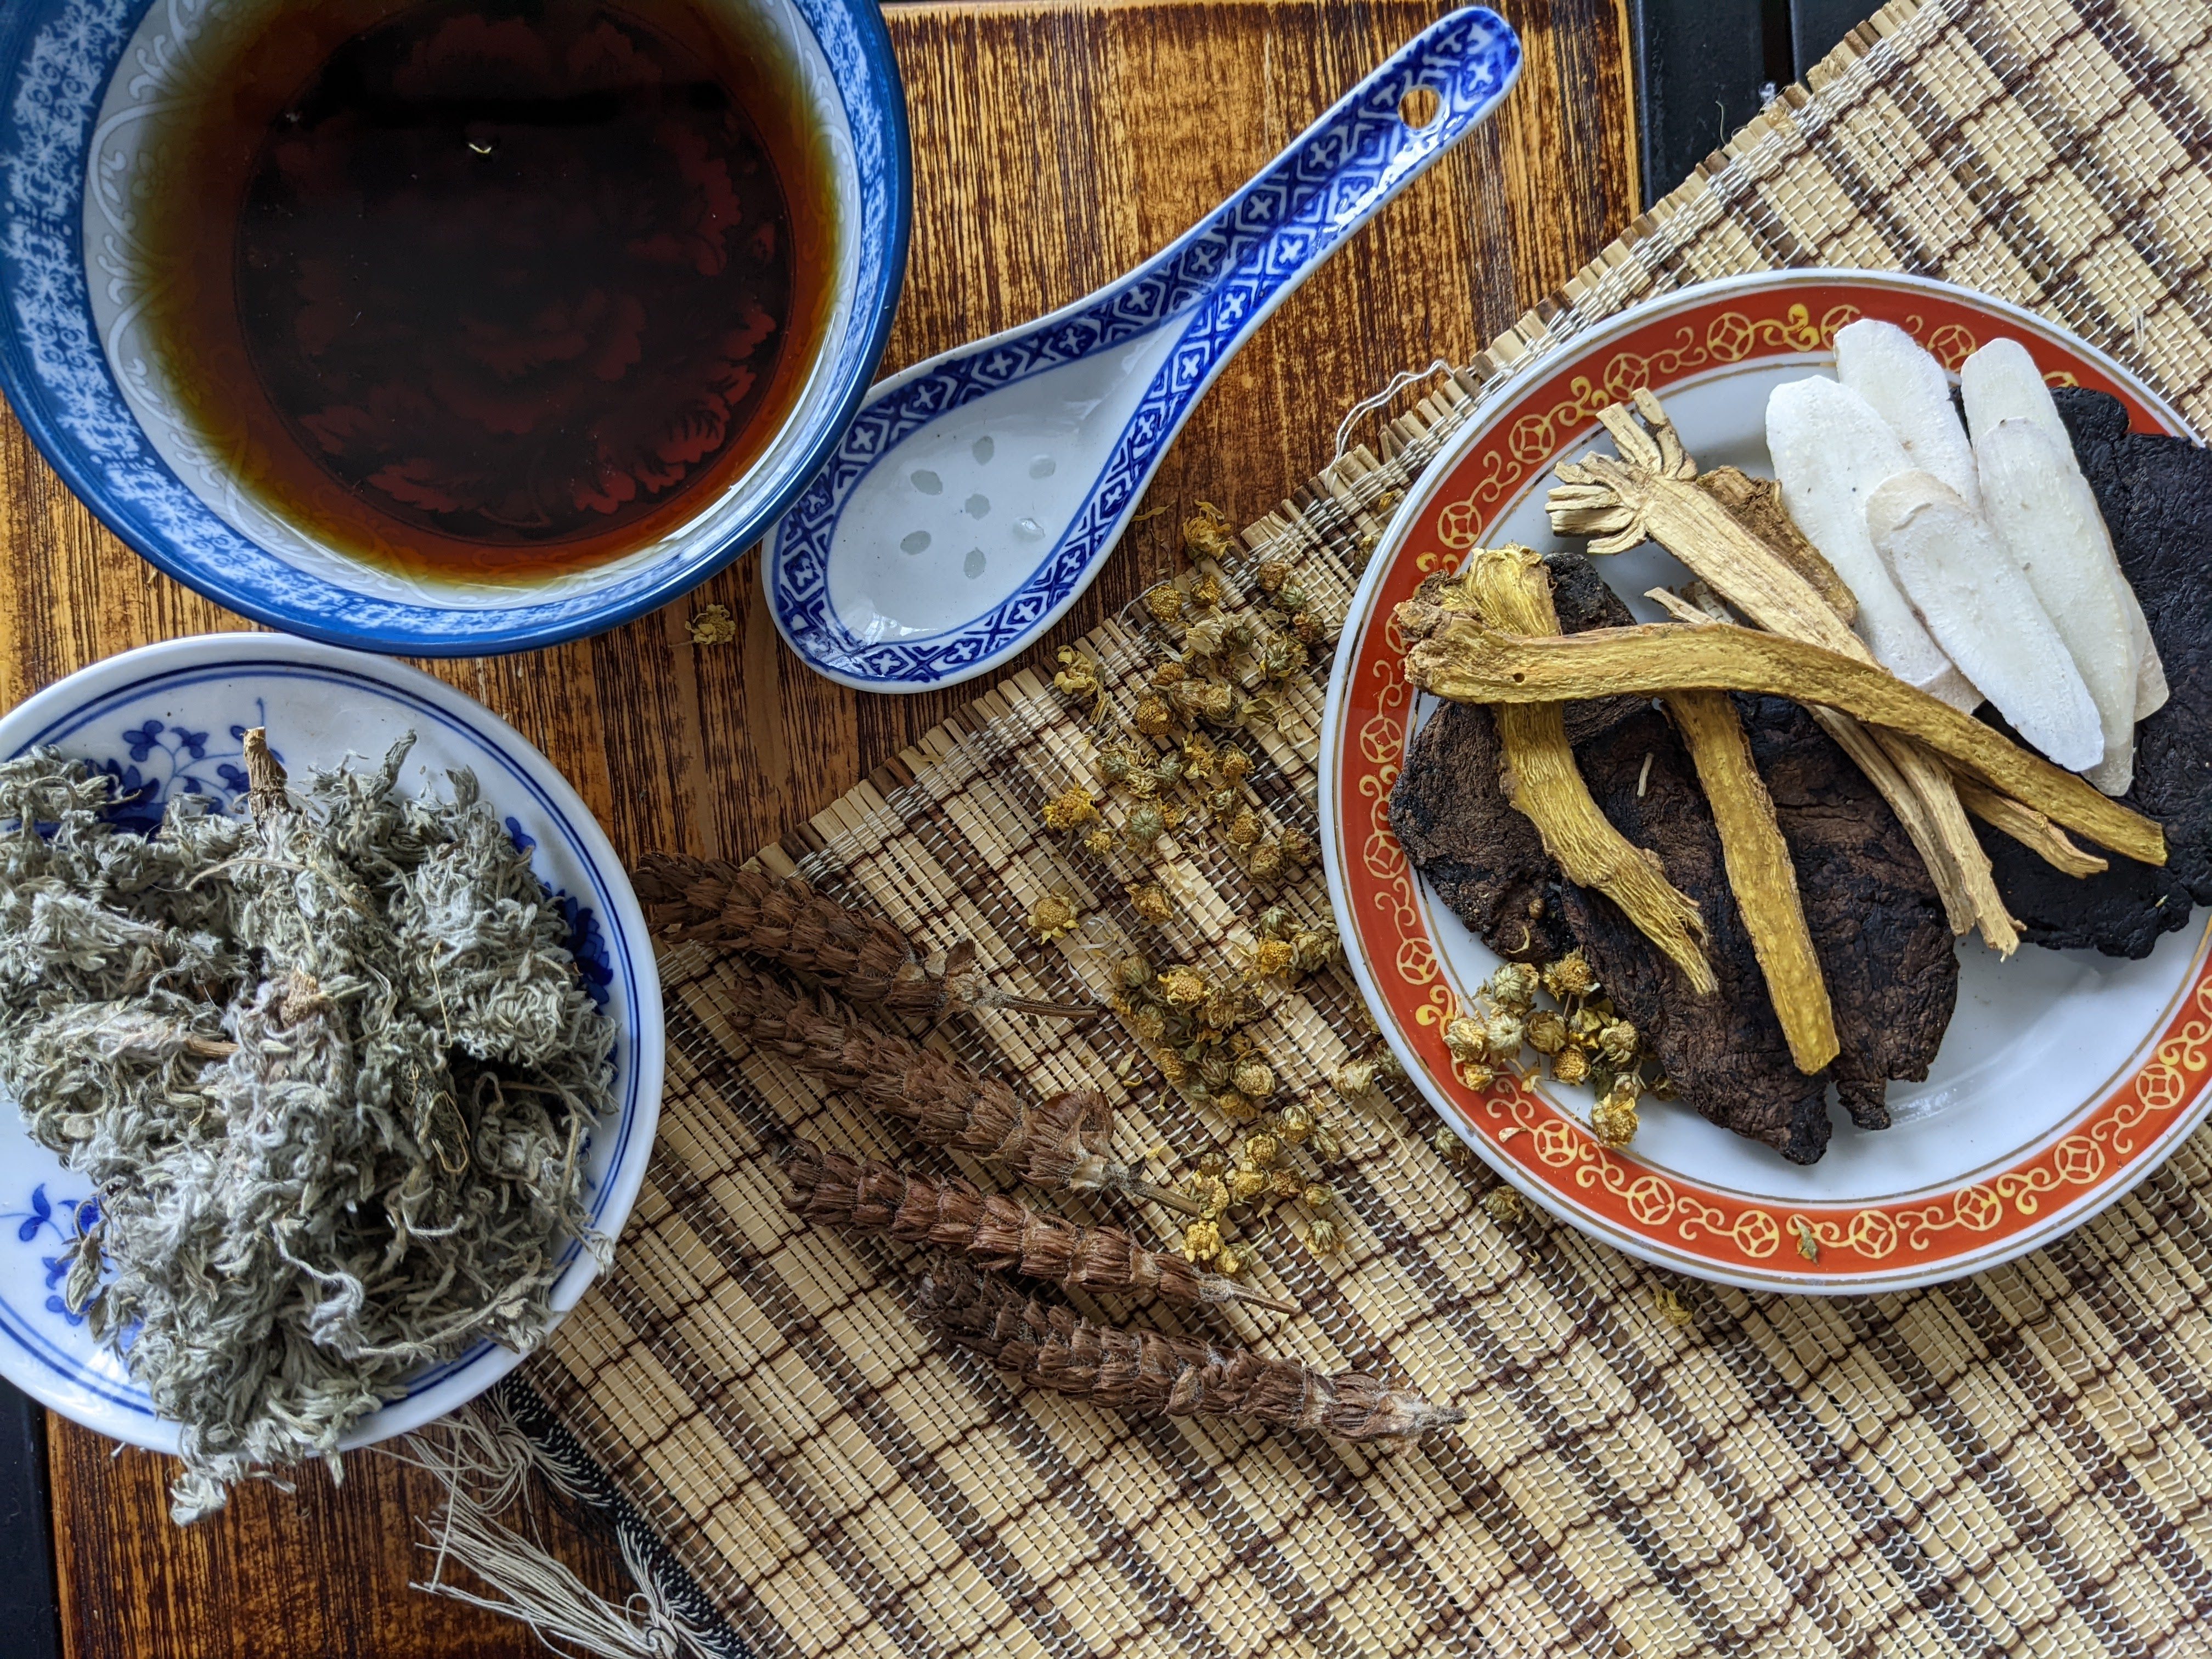 Indian medical professionals are increasingly using Chinese herbs to treat various ailments. Photo: SCMP